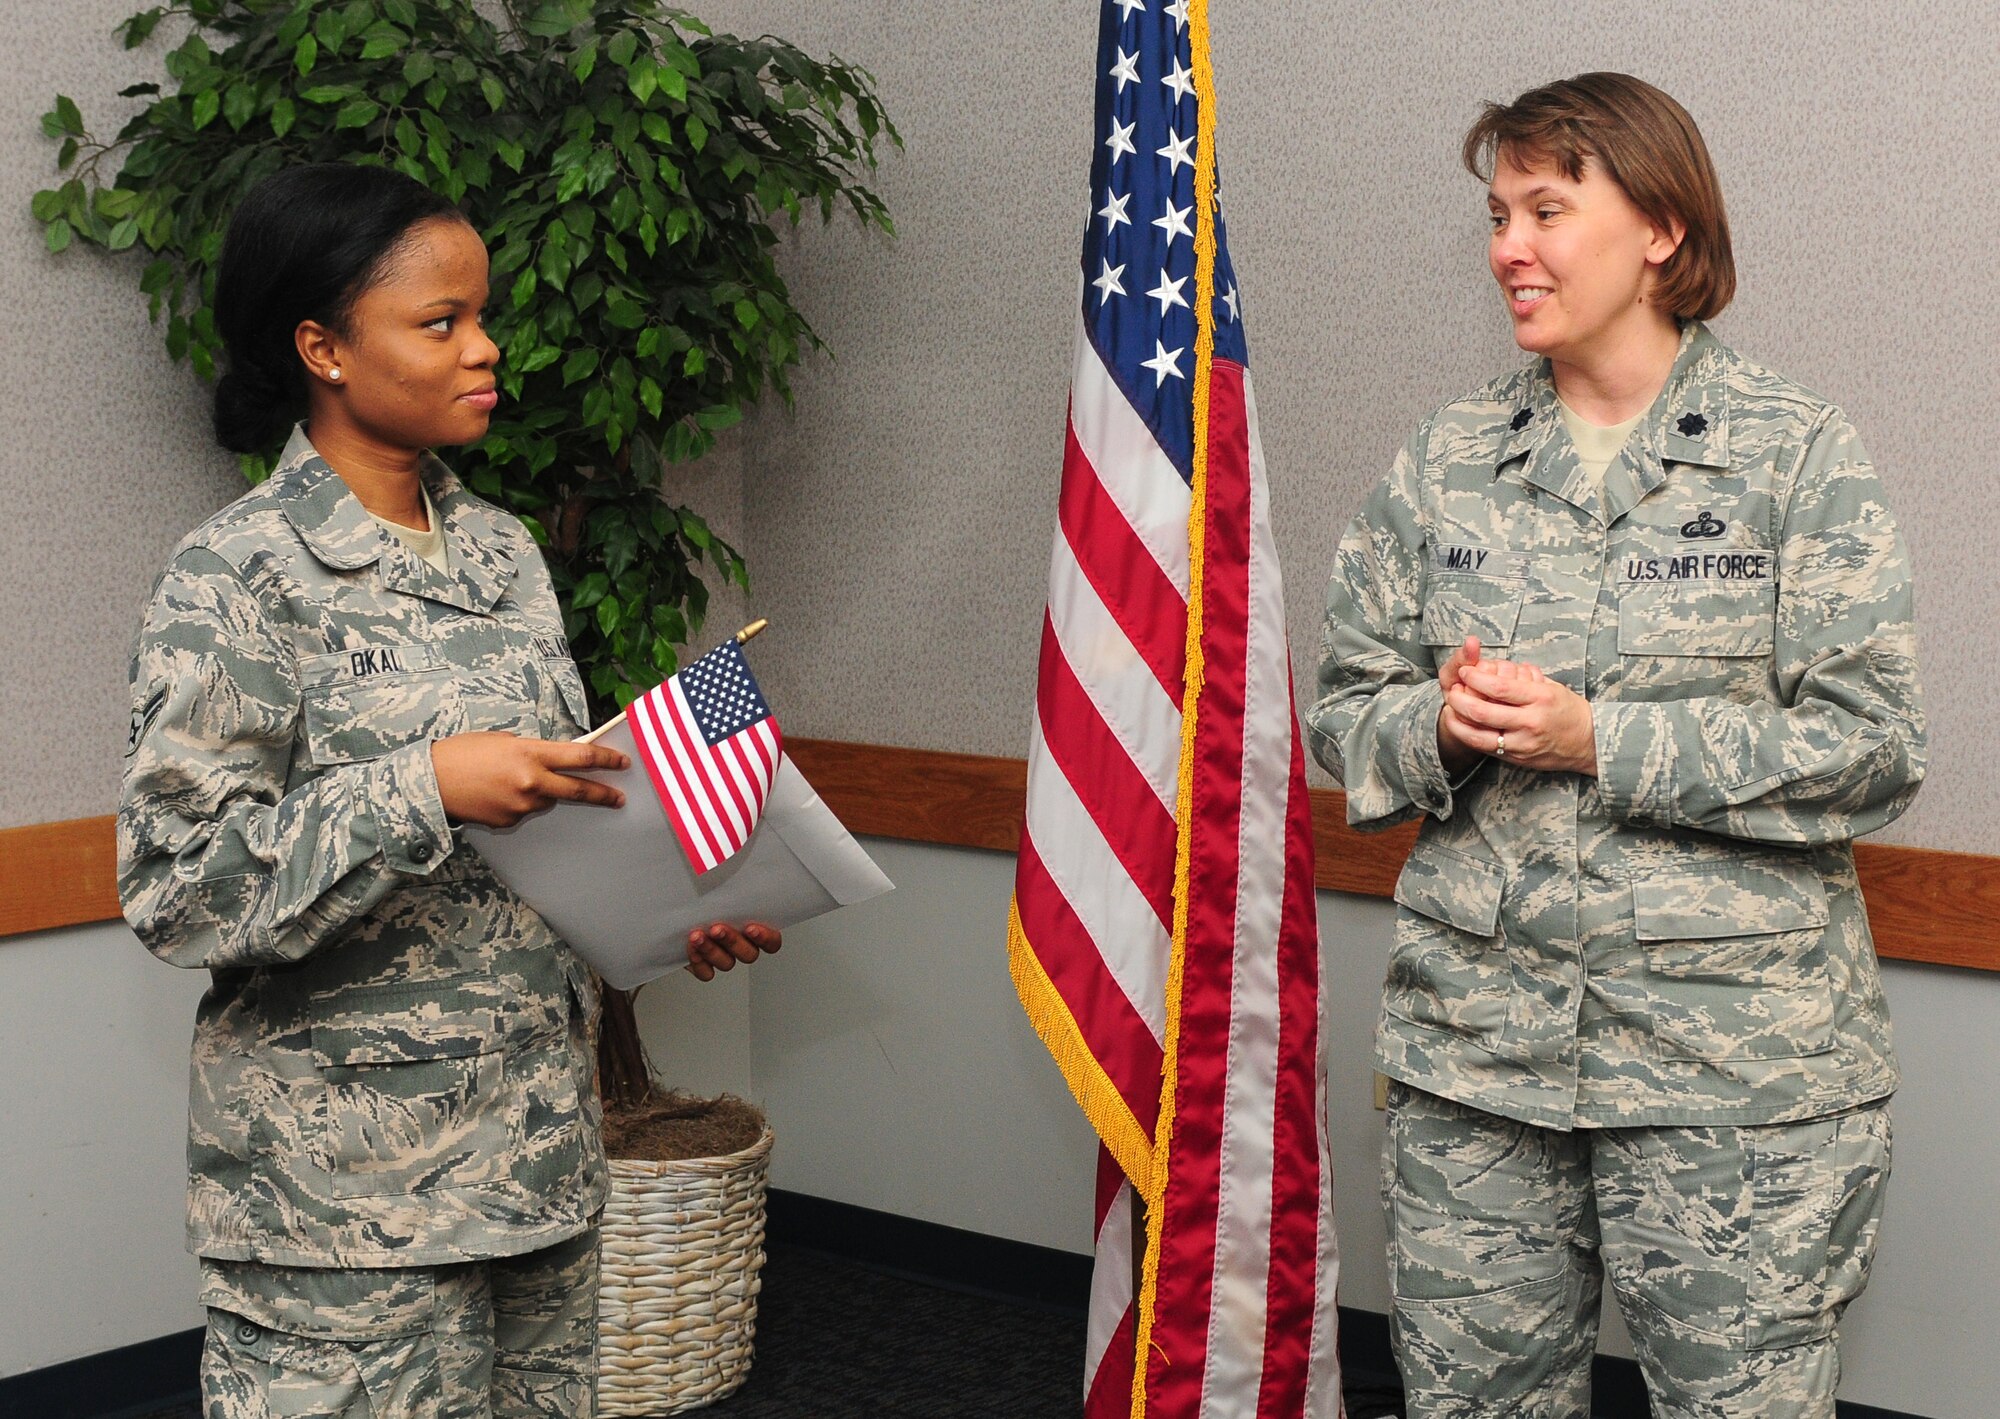 Airman 1st Class Princess Okai, 9th Force Support Squadron, food service apprentice is congratulated by Lt. Col. Connie May, 9th FSS Commander on becoming an American citizen at the Airman Family Readiness Center at Beale Air Force Base Calif., July 27, 2012. Okai said she joined the Air Force to travel and improve her education. (U.S. Air Force photo by Senior Airman Allen Pollard/Released)